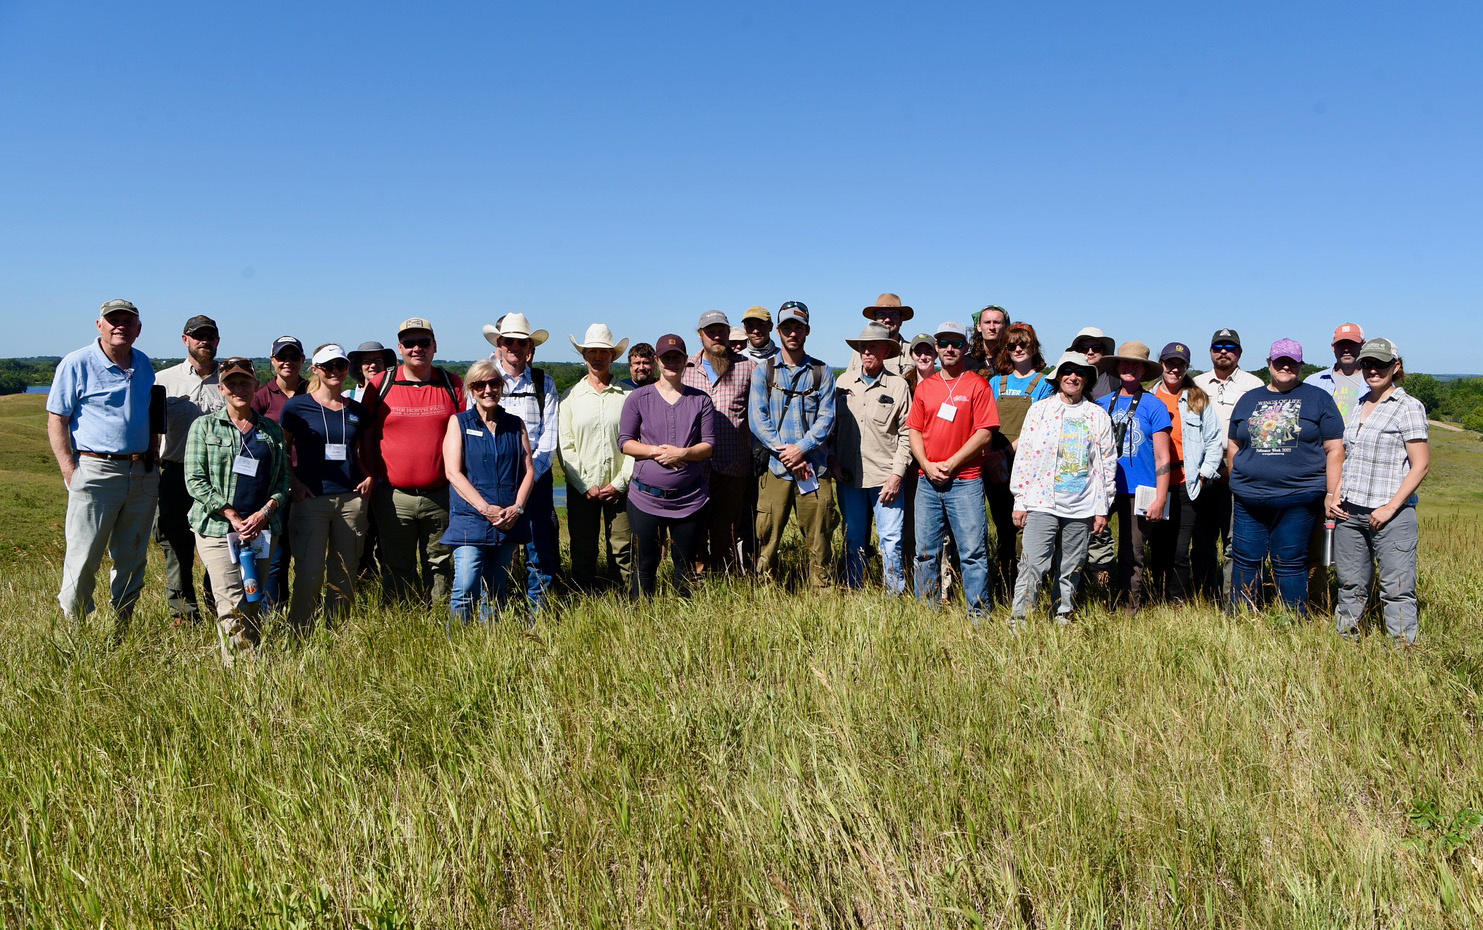 Group of NAA members in a grassy field.